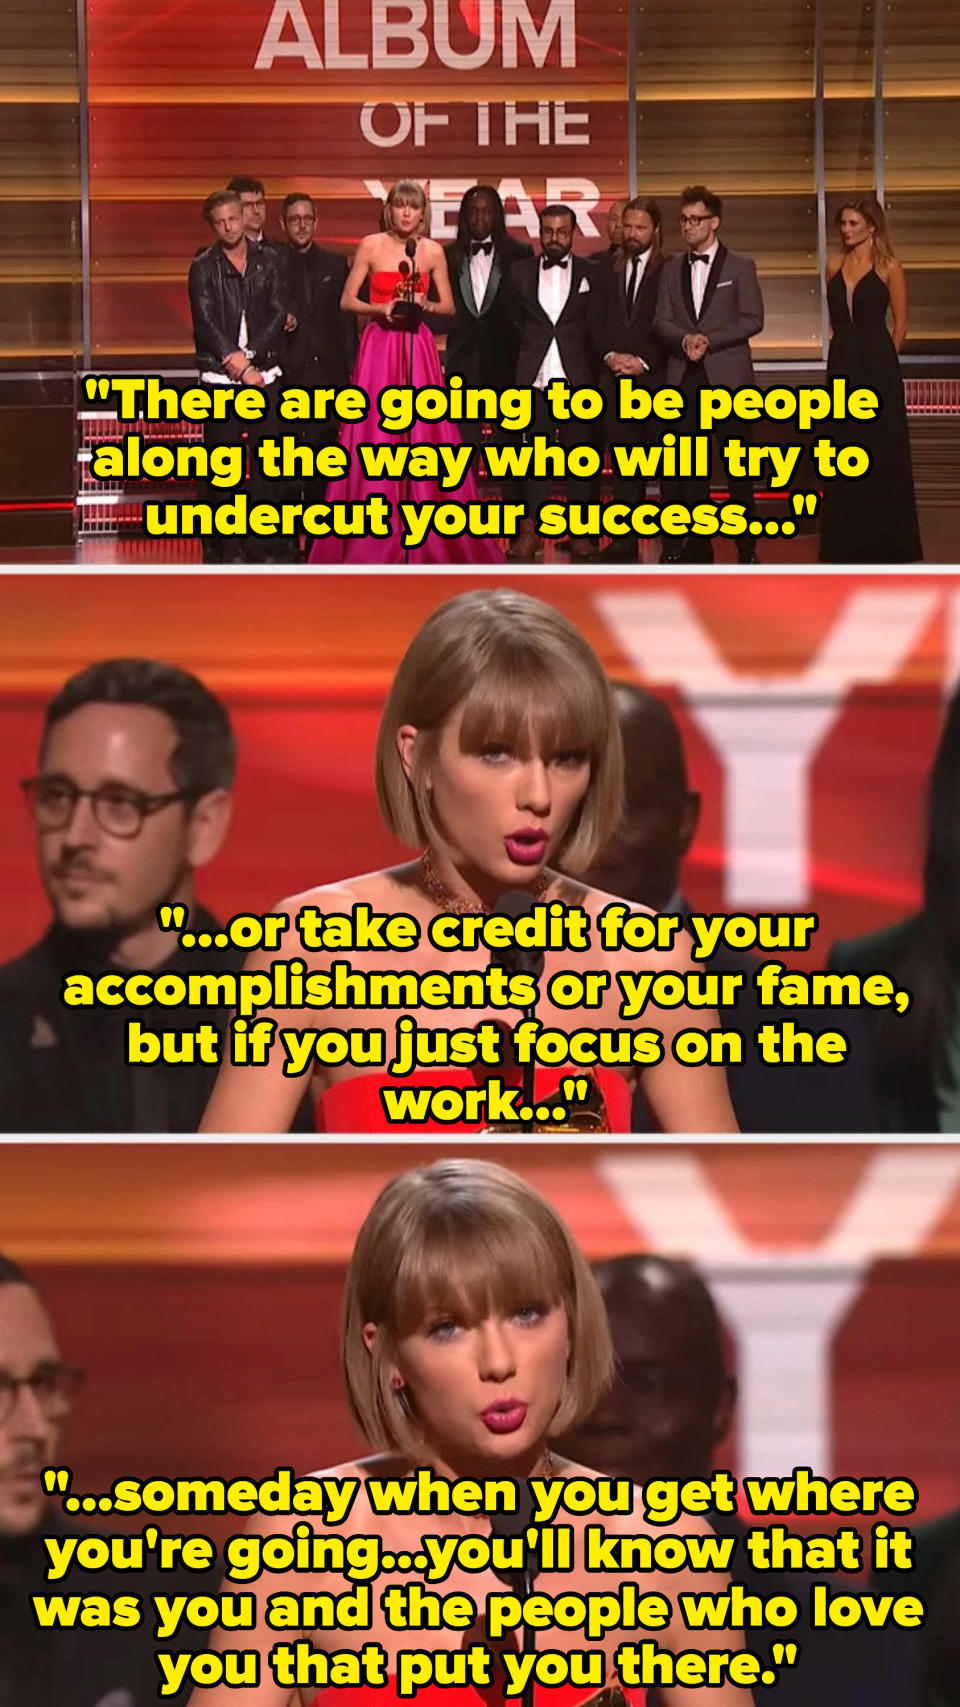 Taylor says there will be people who try to take credit for your accomplishments, but if you keep working hard, you'll get where you want to go and you'll know it was you who put yourself there